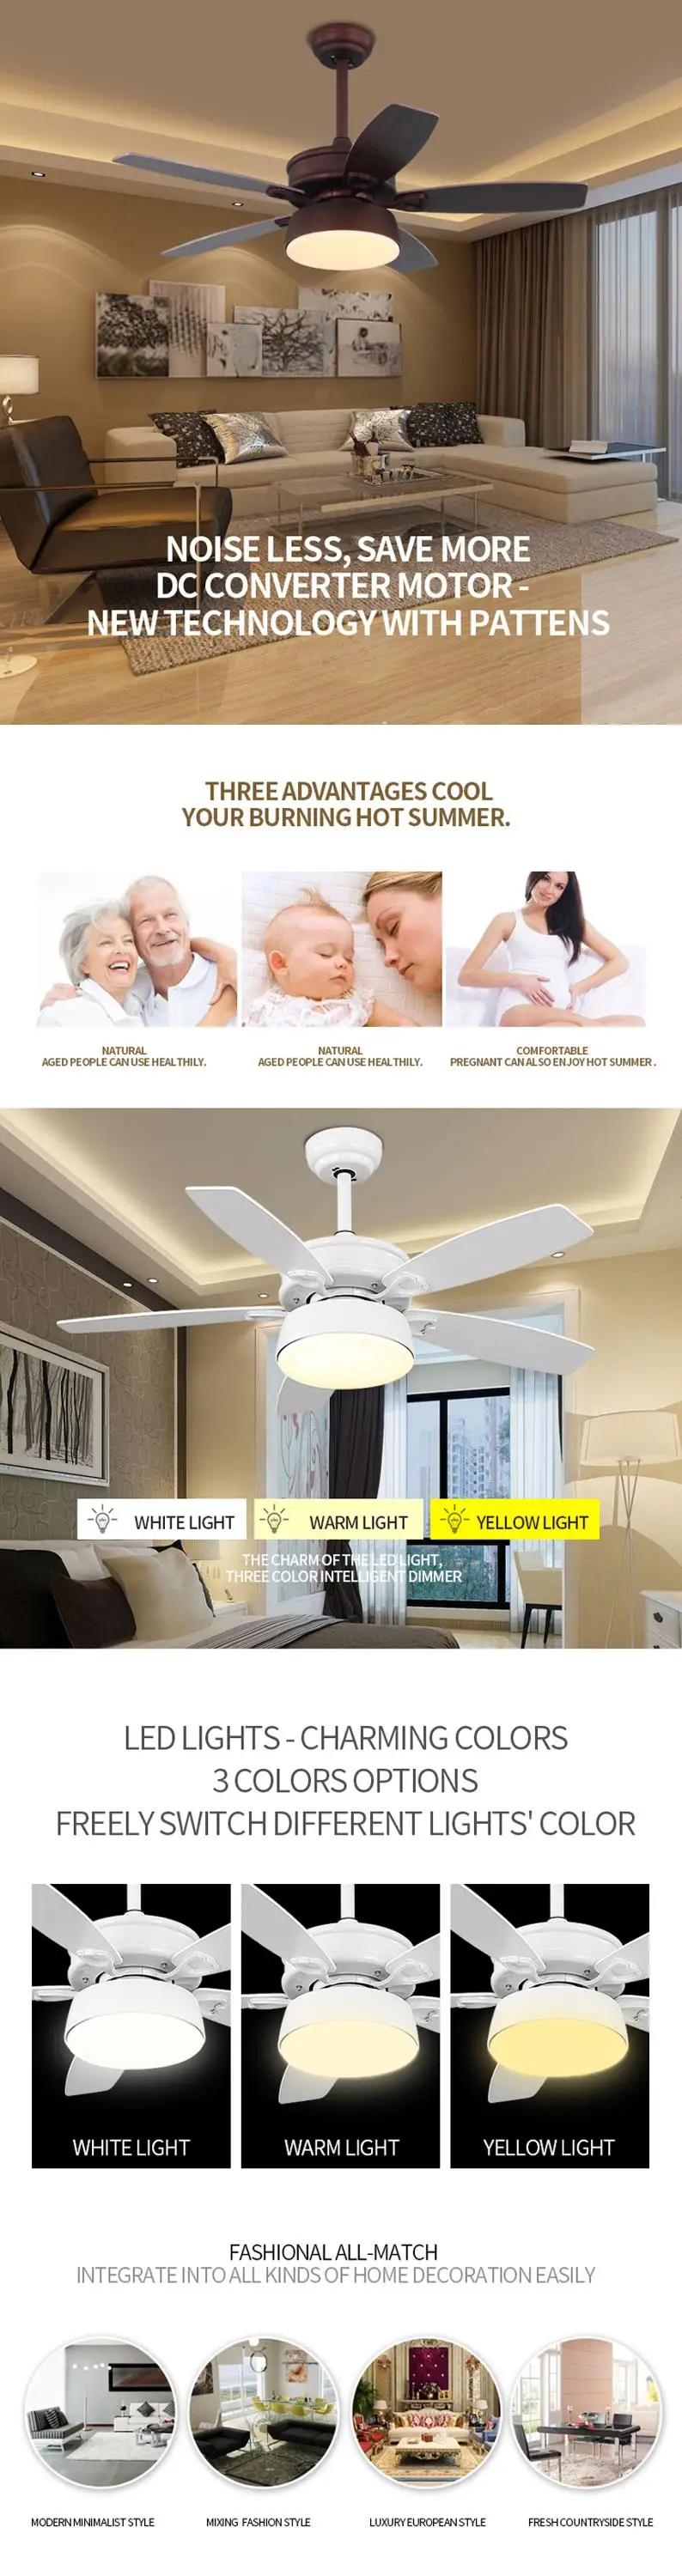 China supply classic design modern 5 blade ceiling fan with light